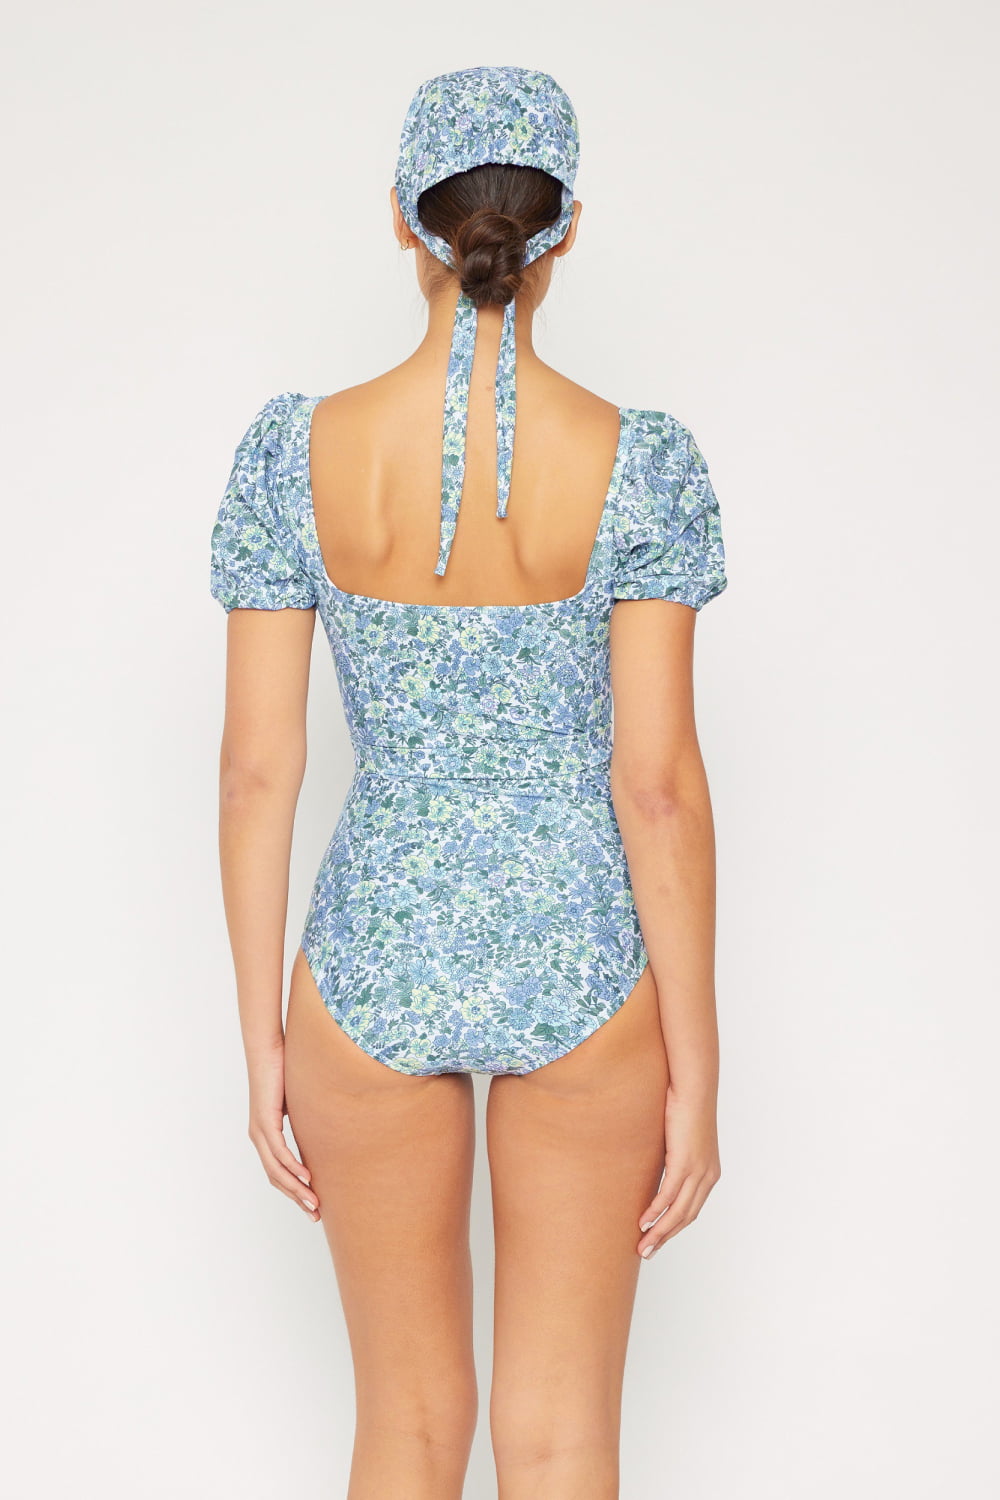 Marina West Swim Salty Air Puff Sleeve One-Piece in Blue - Cheeky Chic Boutique